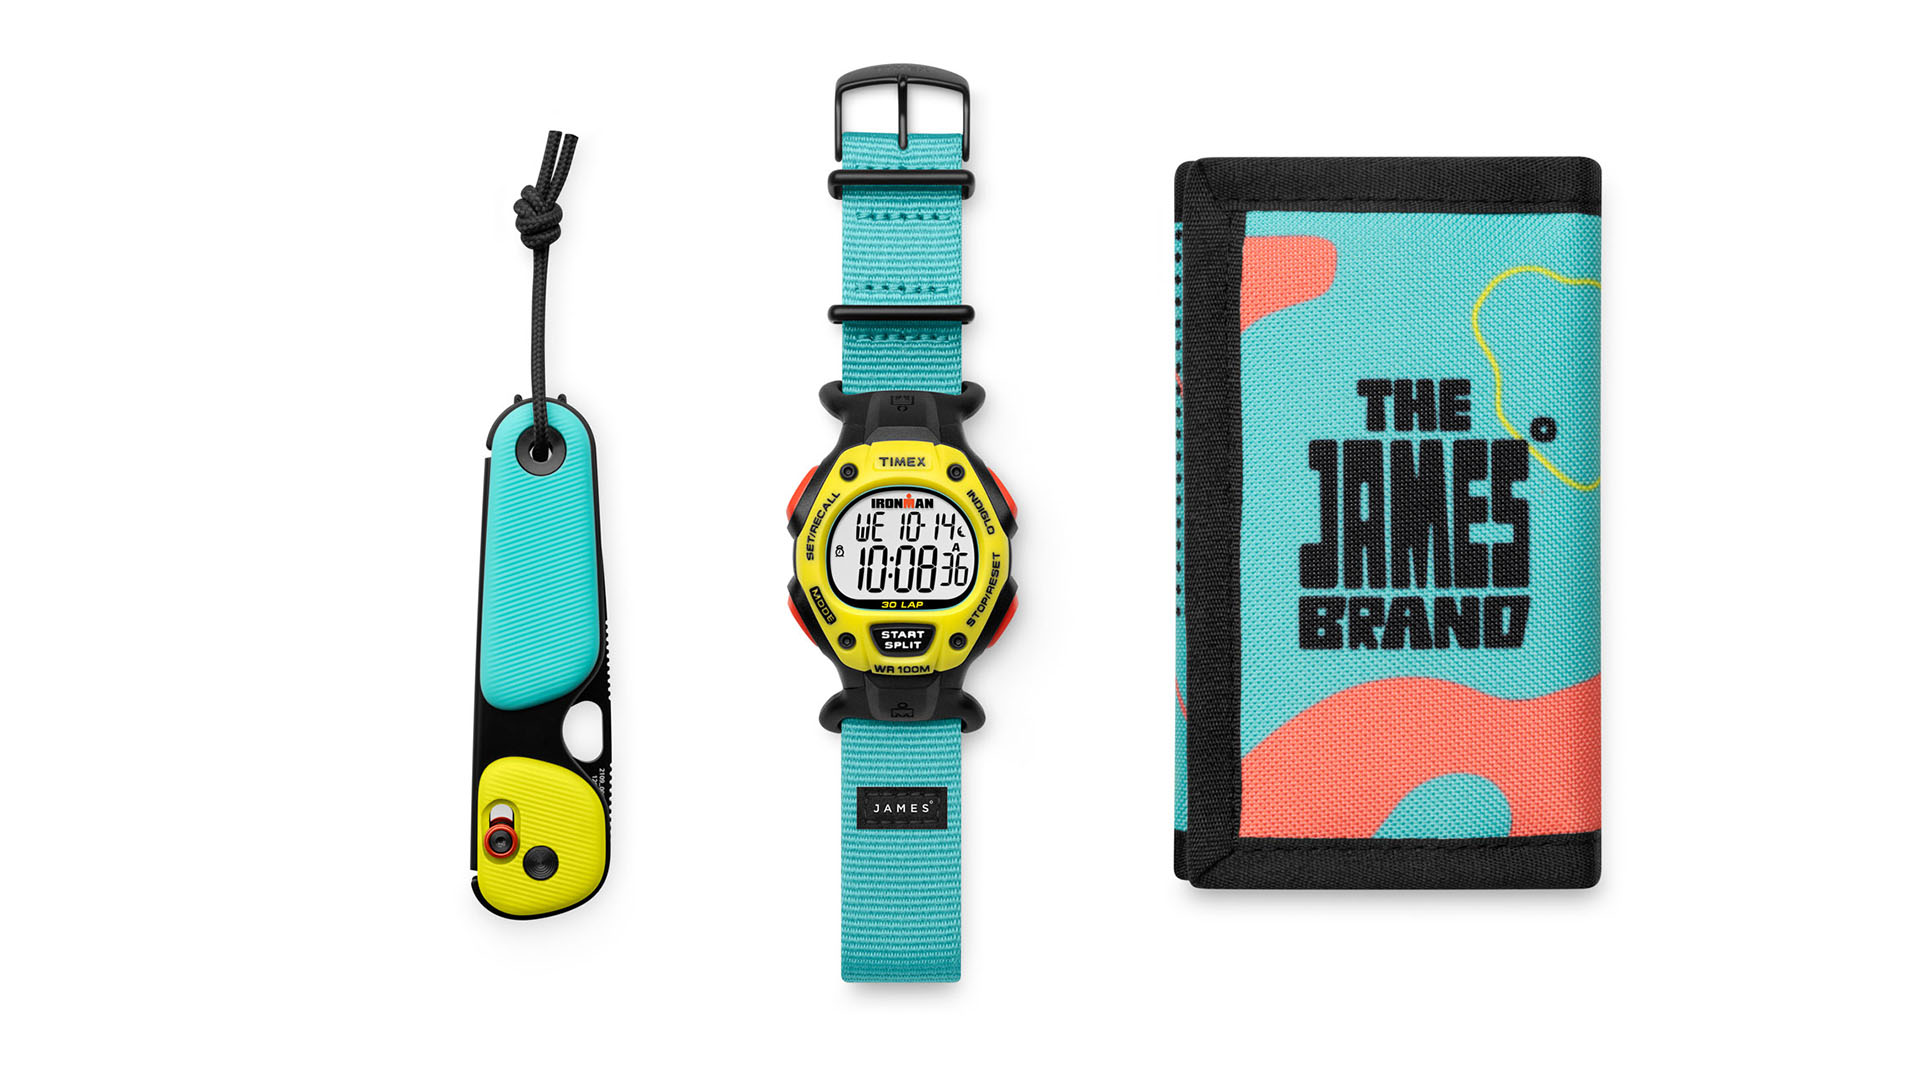 Timex Ironman X The James Brand Collection